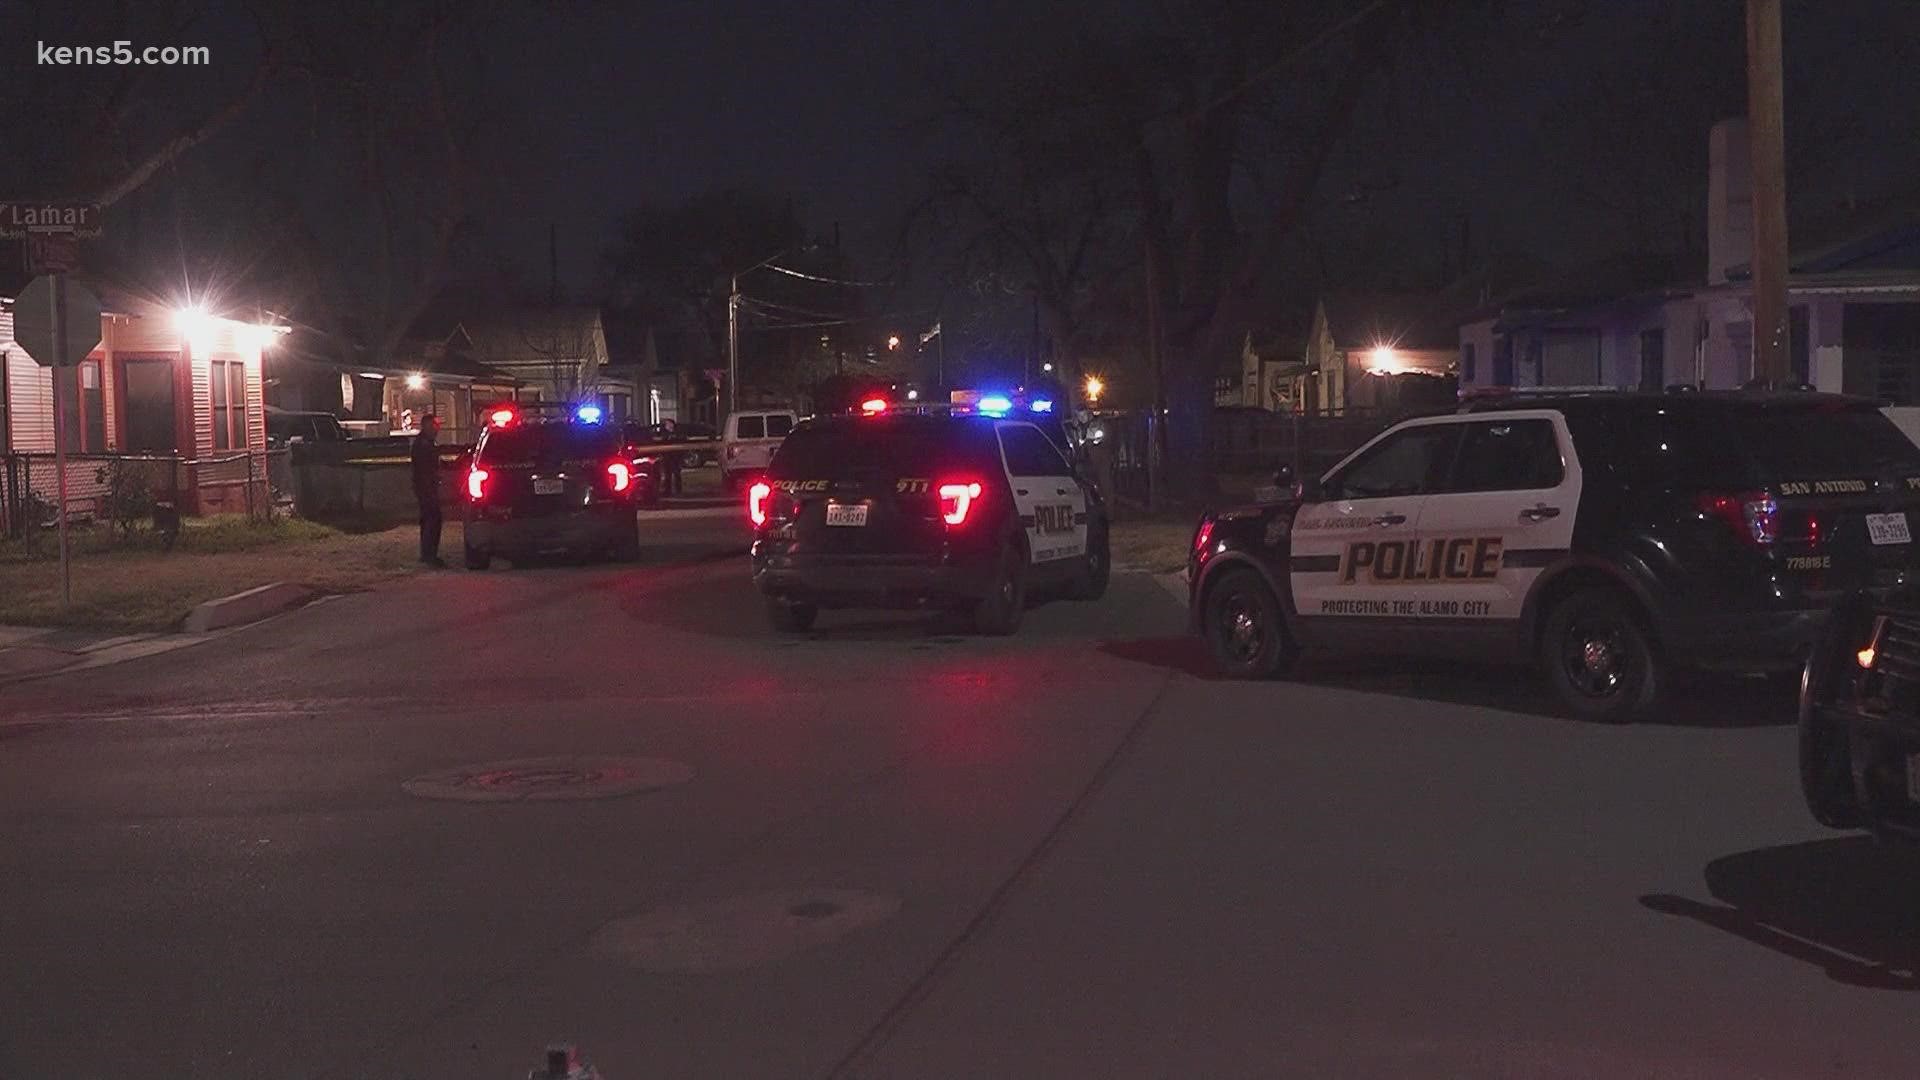 The victim is believed to be in his 50s and the suspect is in his 20s. The shooting happened just after 11:30 p.m. in the 900 block of Lamar Street, south of I-35.